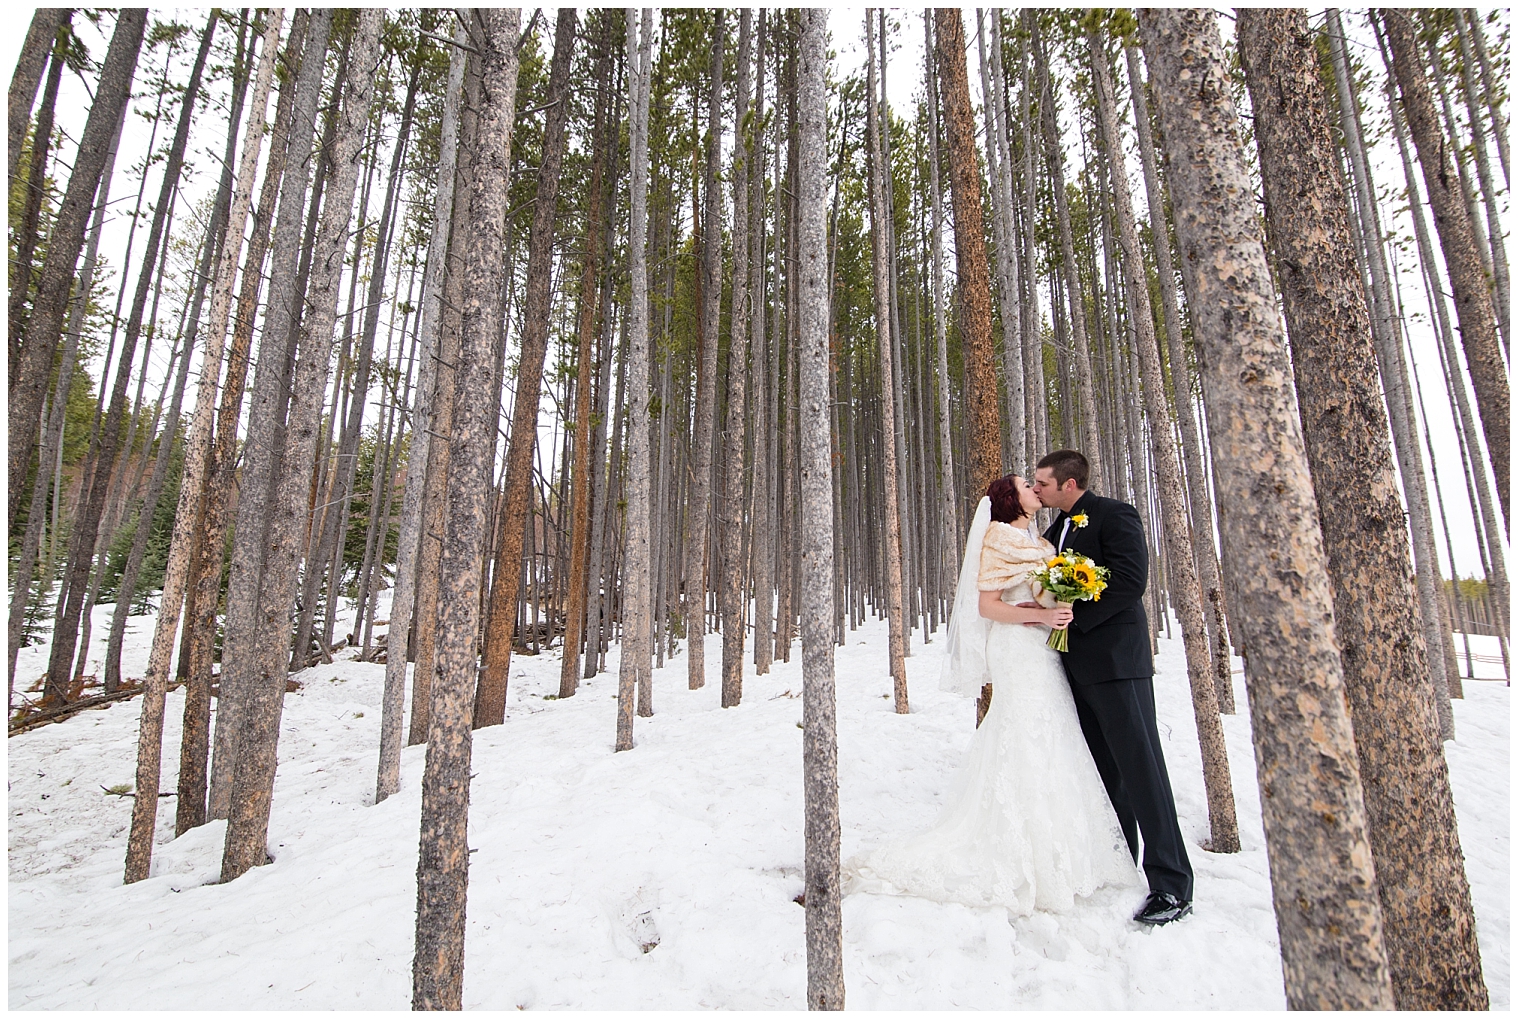 The bride and groom kiss at their winter wedding at Sevens in Breckenridge.